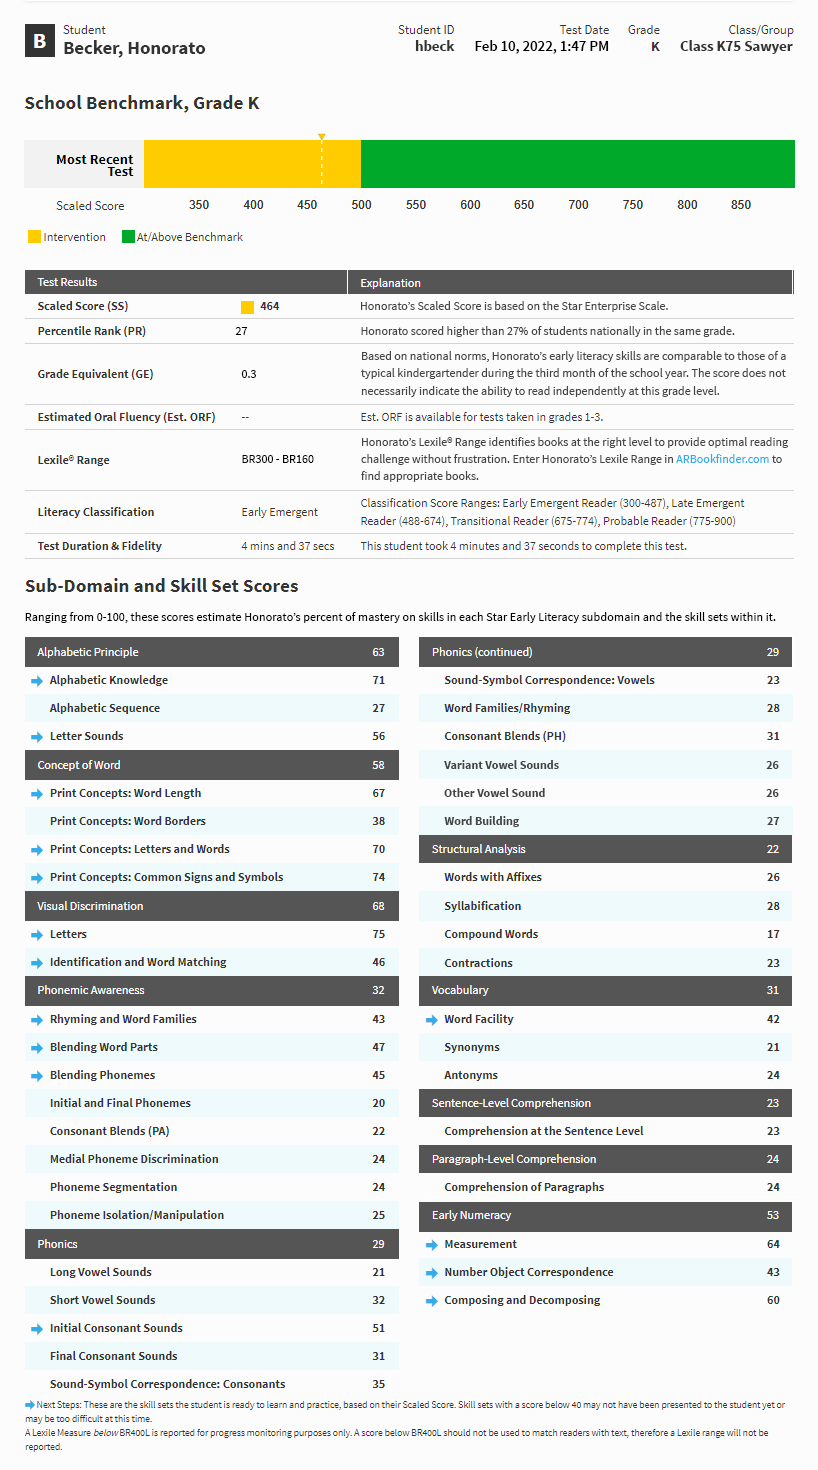 The alternative layout for the report is shown, with test results and domain scores laid out in tables instead of panels.